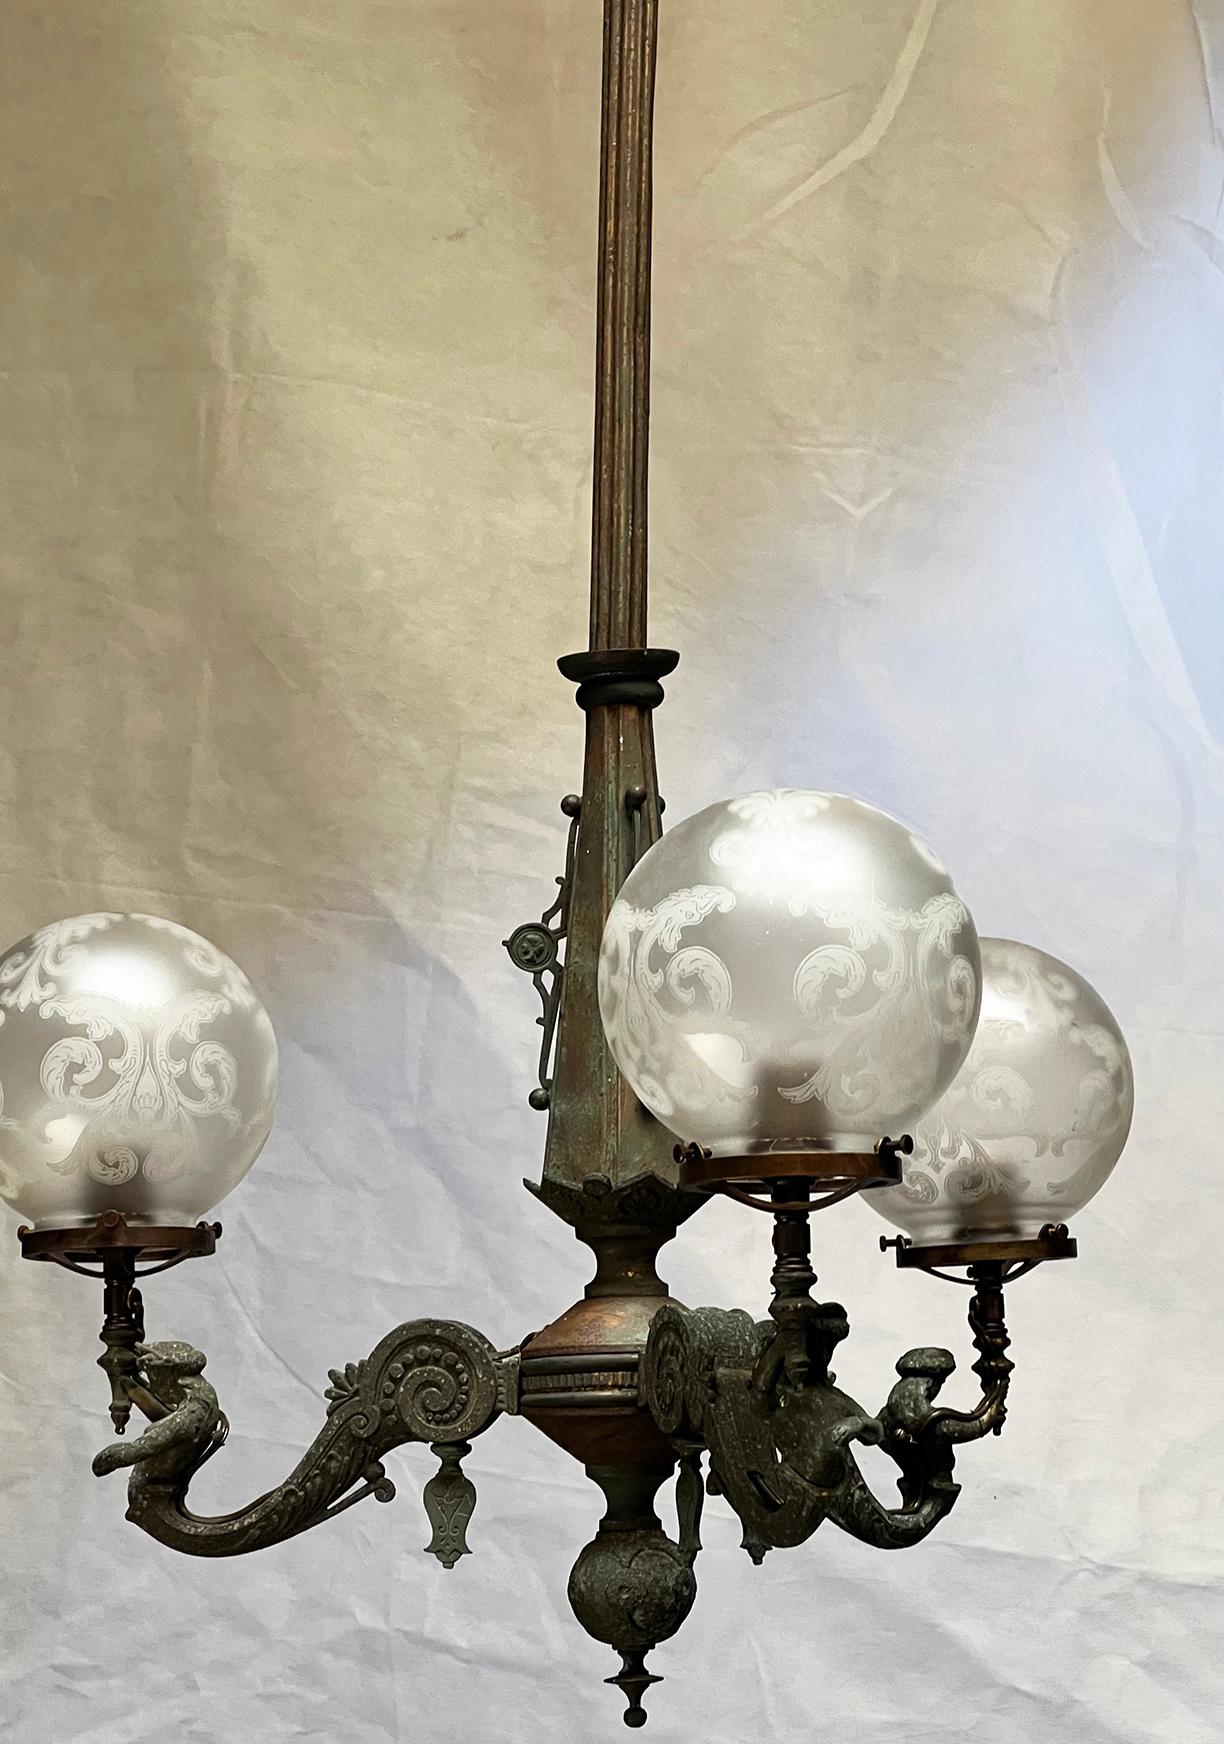 Once a turn of the last century, gas light fixture. Now a converted to electric, modernized for safety, stunning chandelier.
We kept the original finish, as found, which is beautiful aged green on the brass. There is both brass and cast 'pot-metal